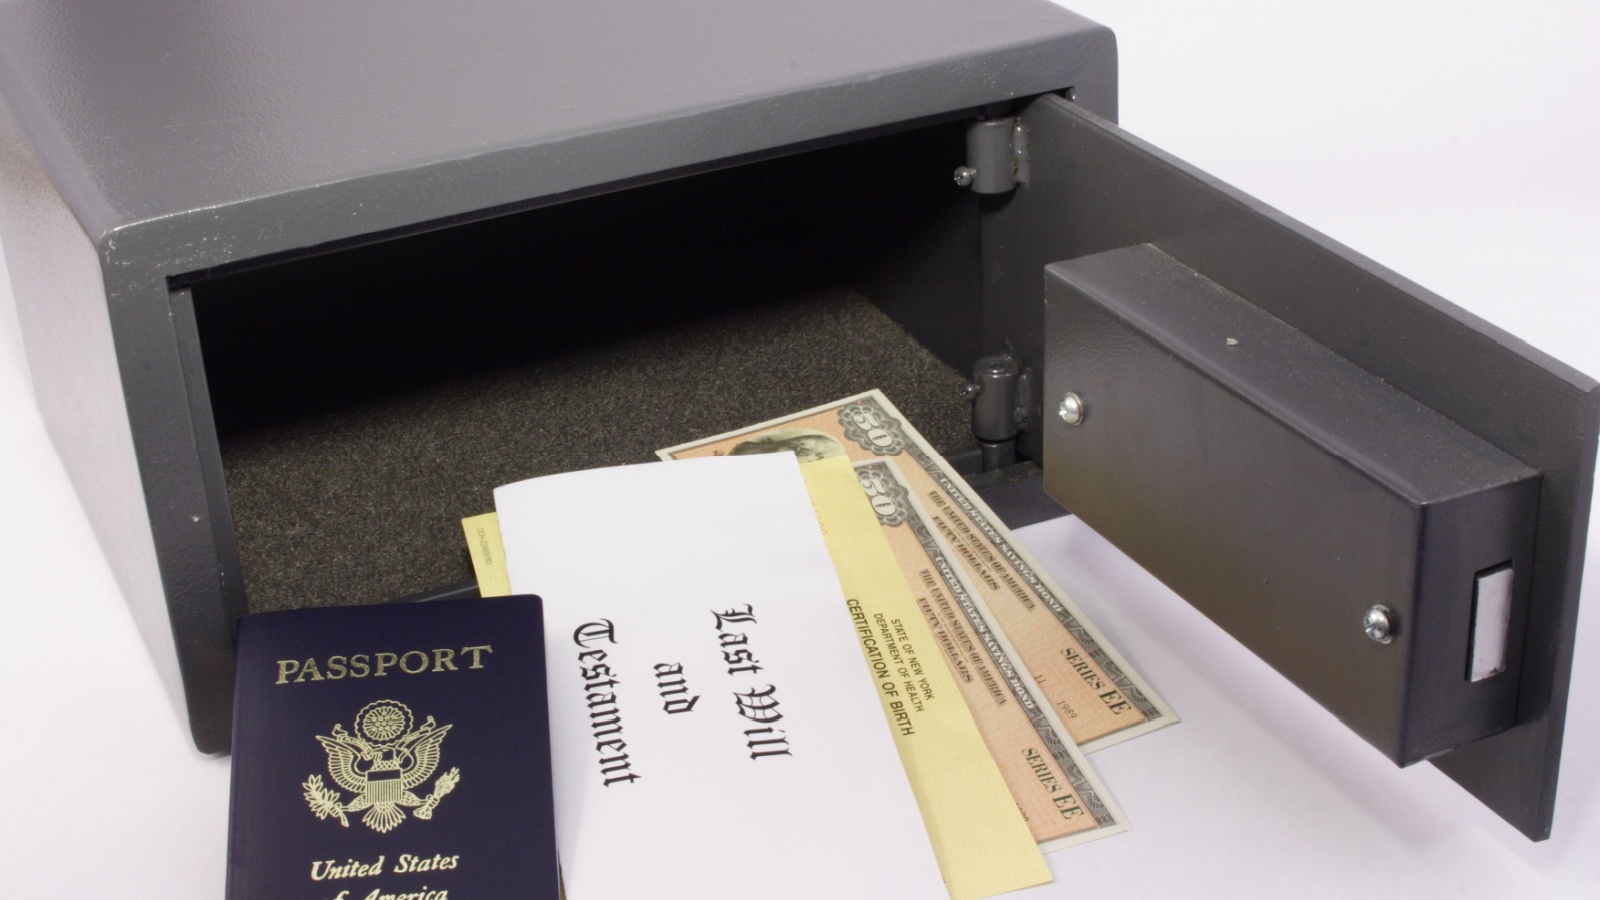 Personal documents in a safe place